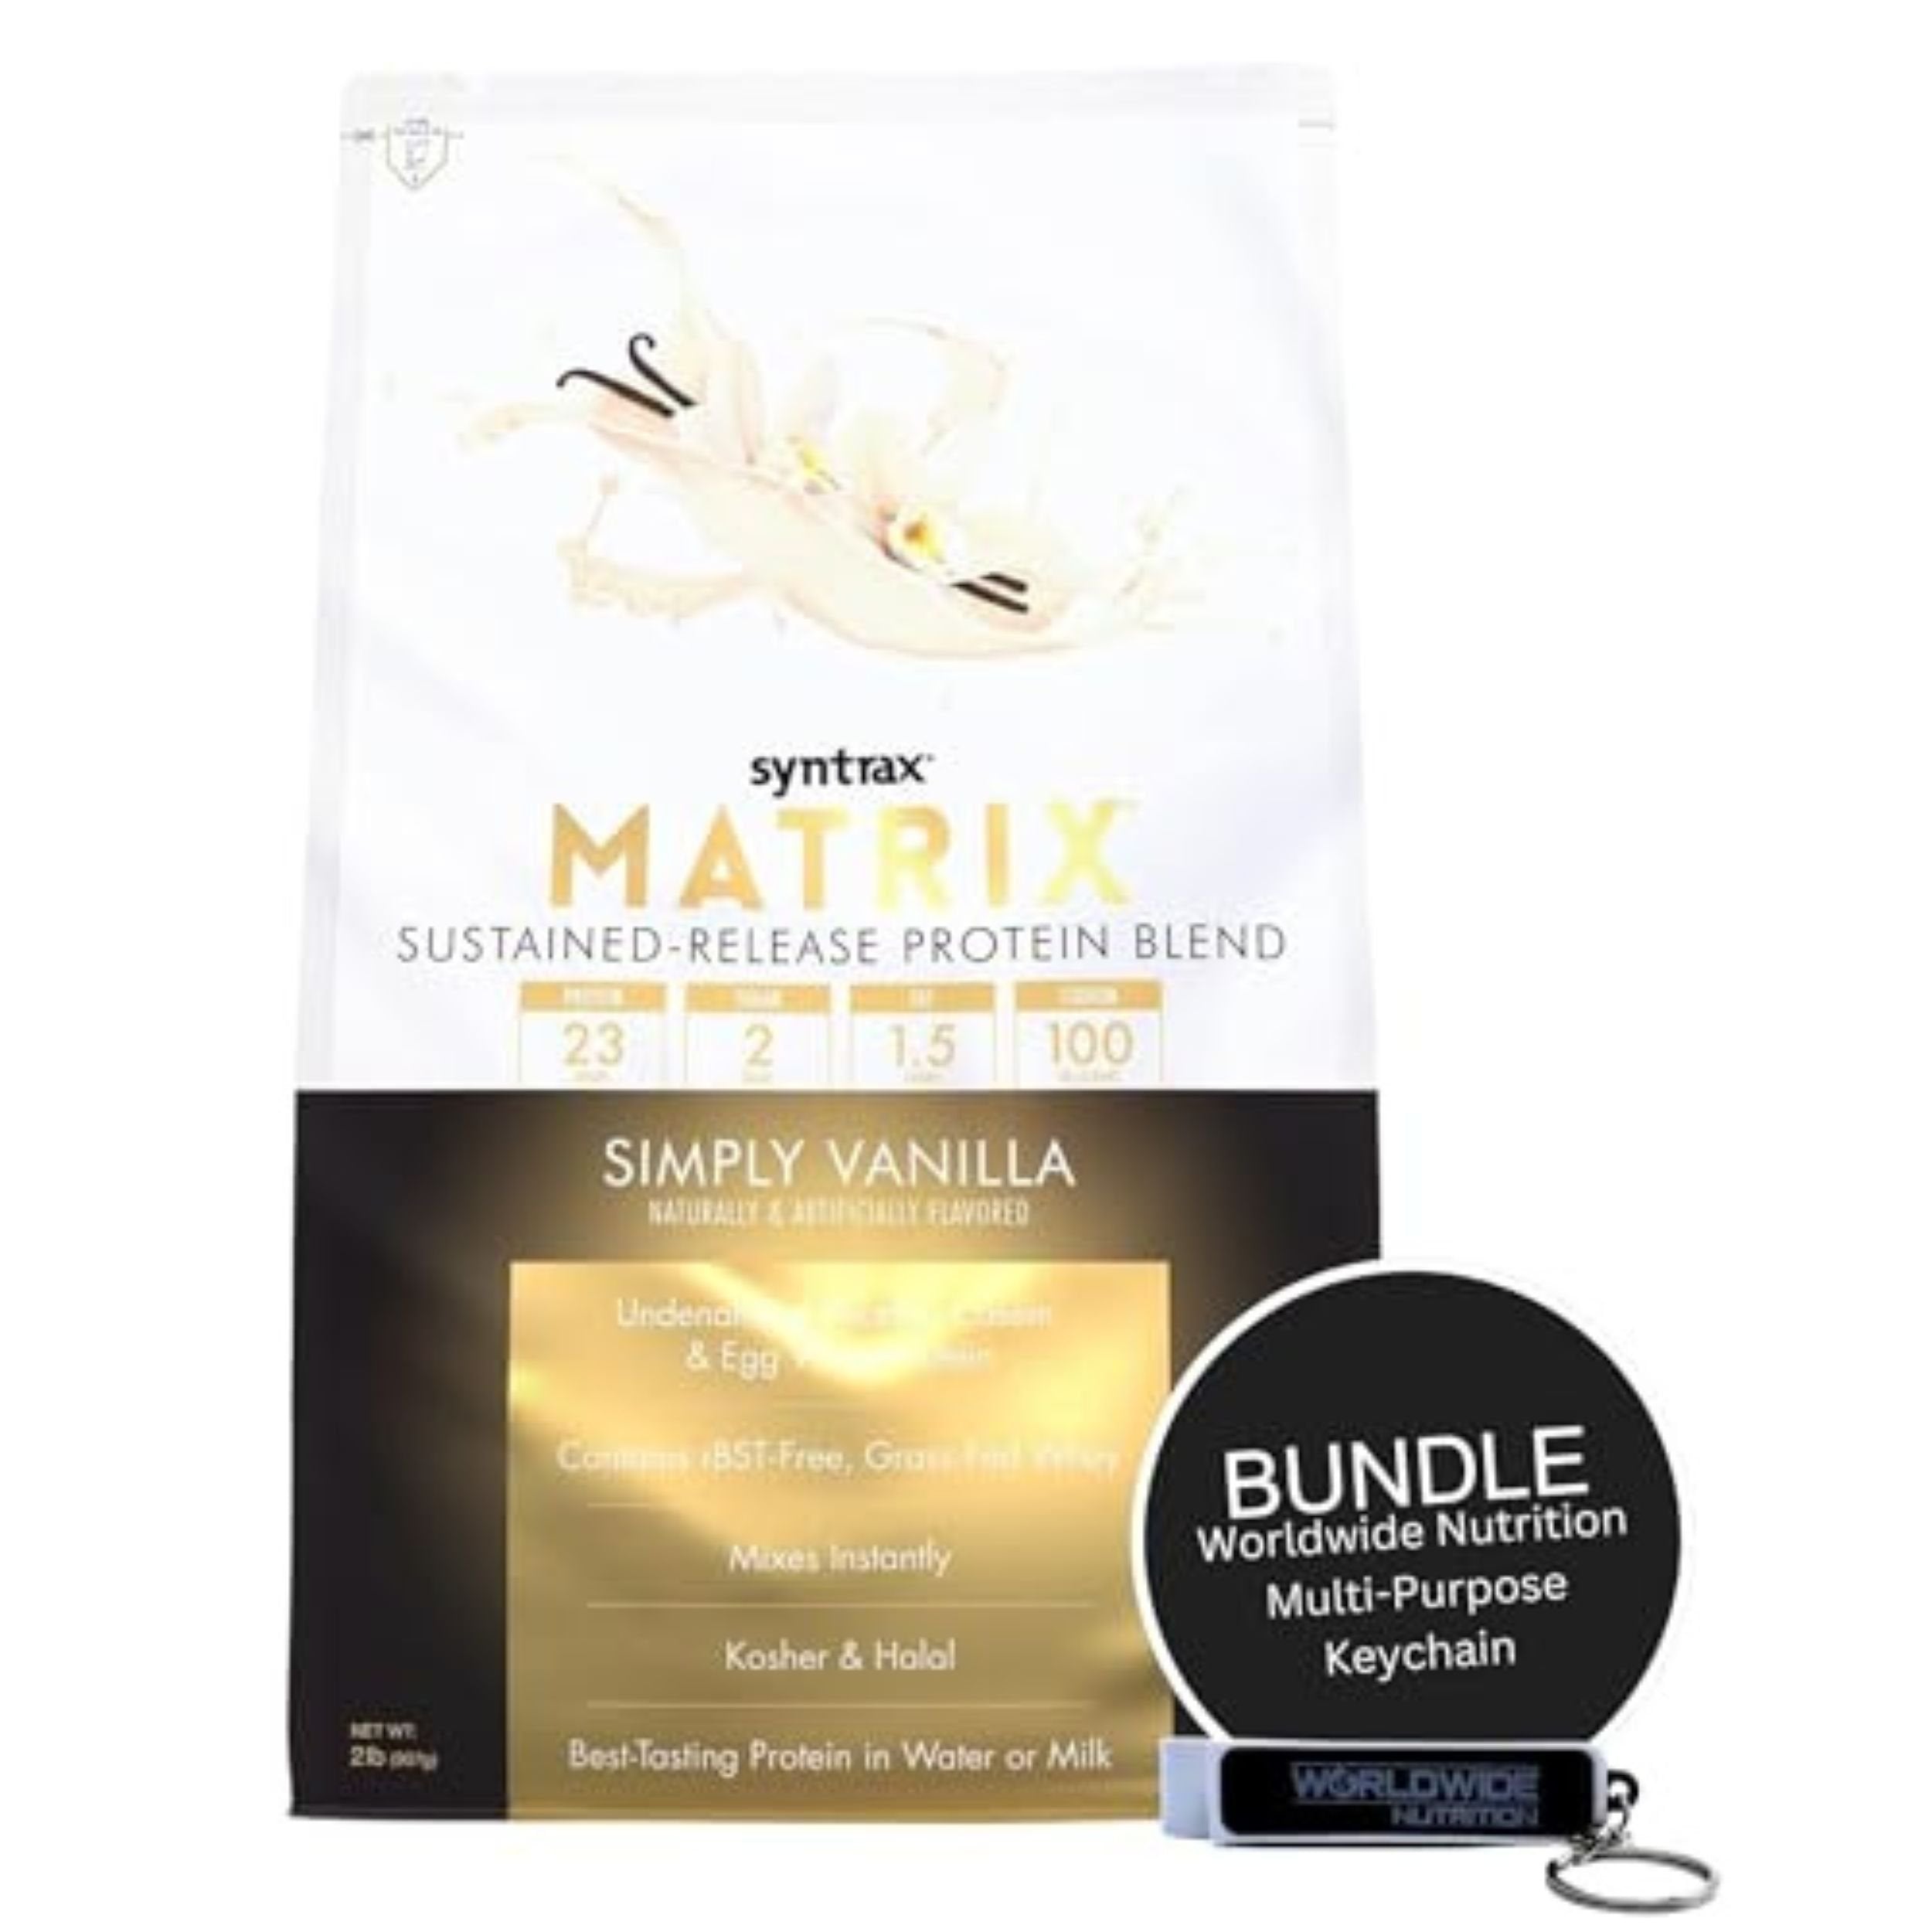 Syntrax Bundle, 2 Items Matrix Protein Powder 5.0 Sustained-Release Ca